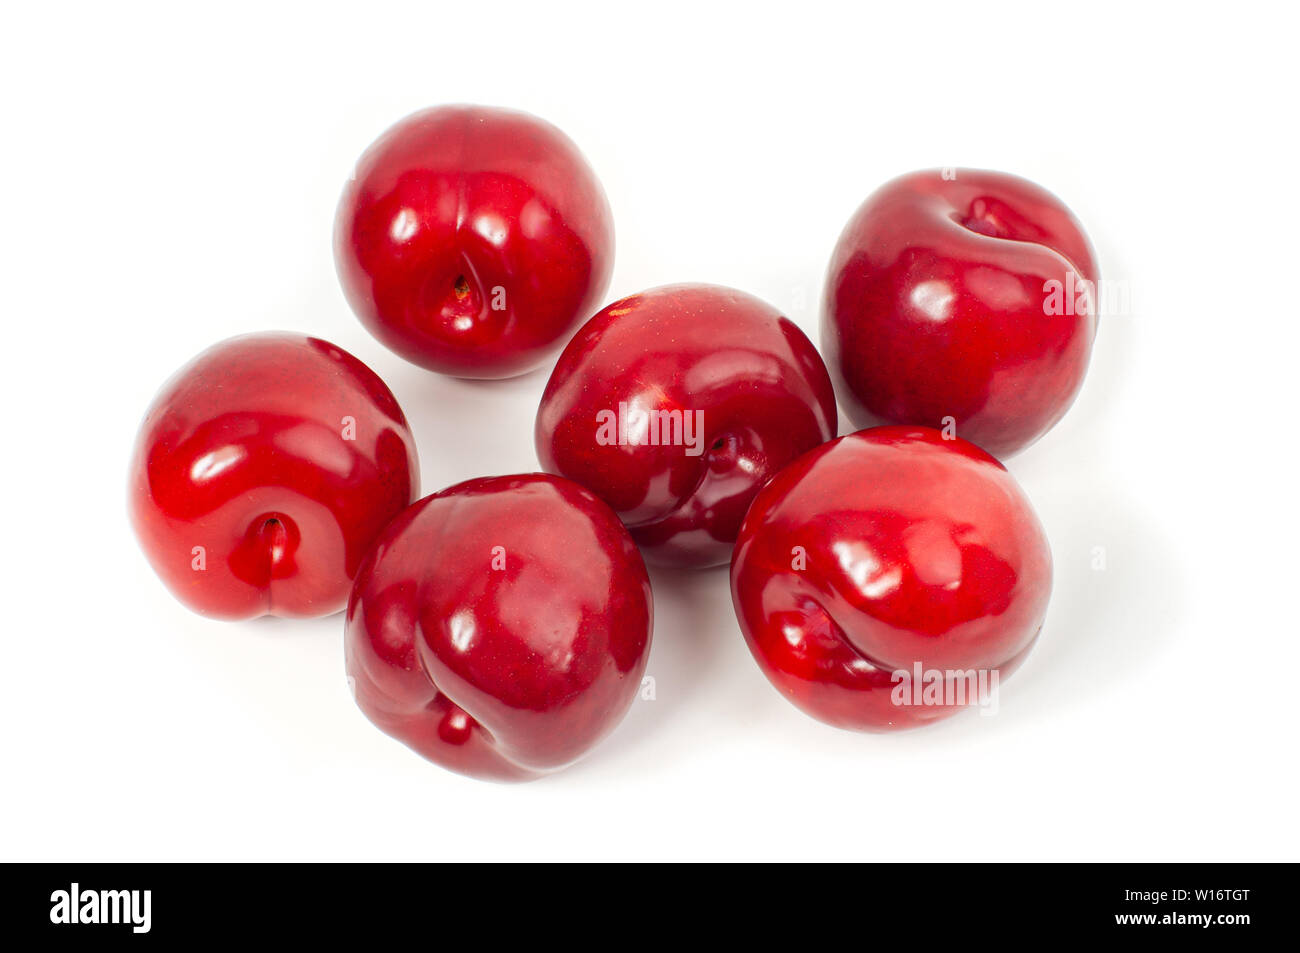 Fresh red plums on white background. Dieting Stock Photo